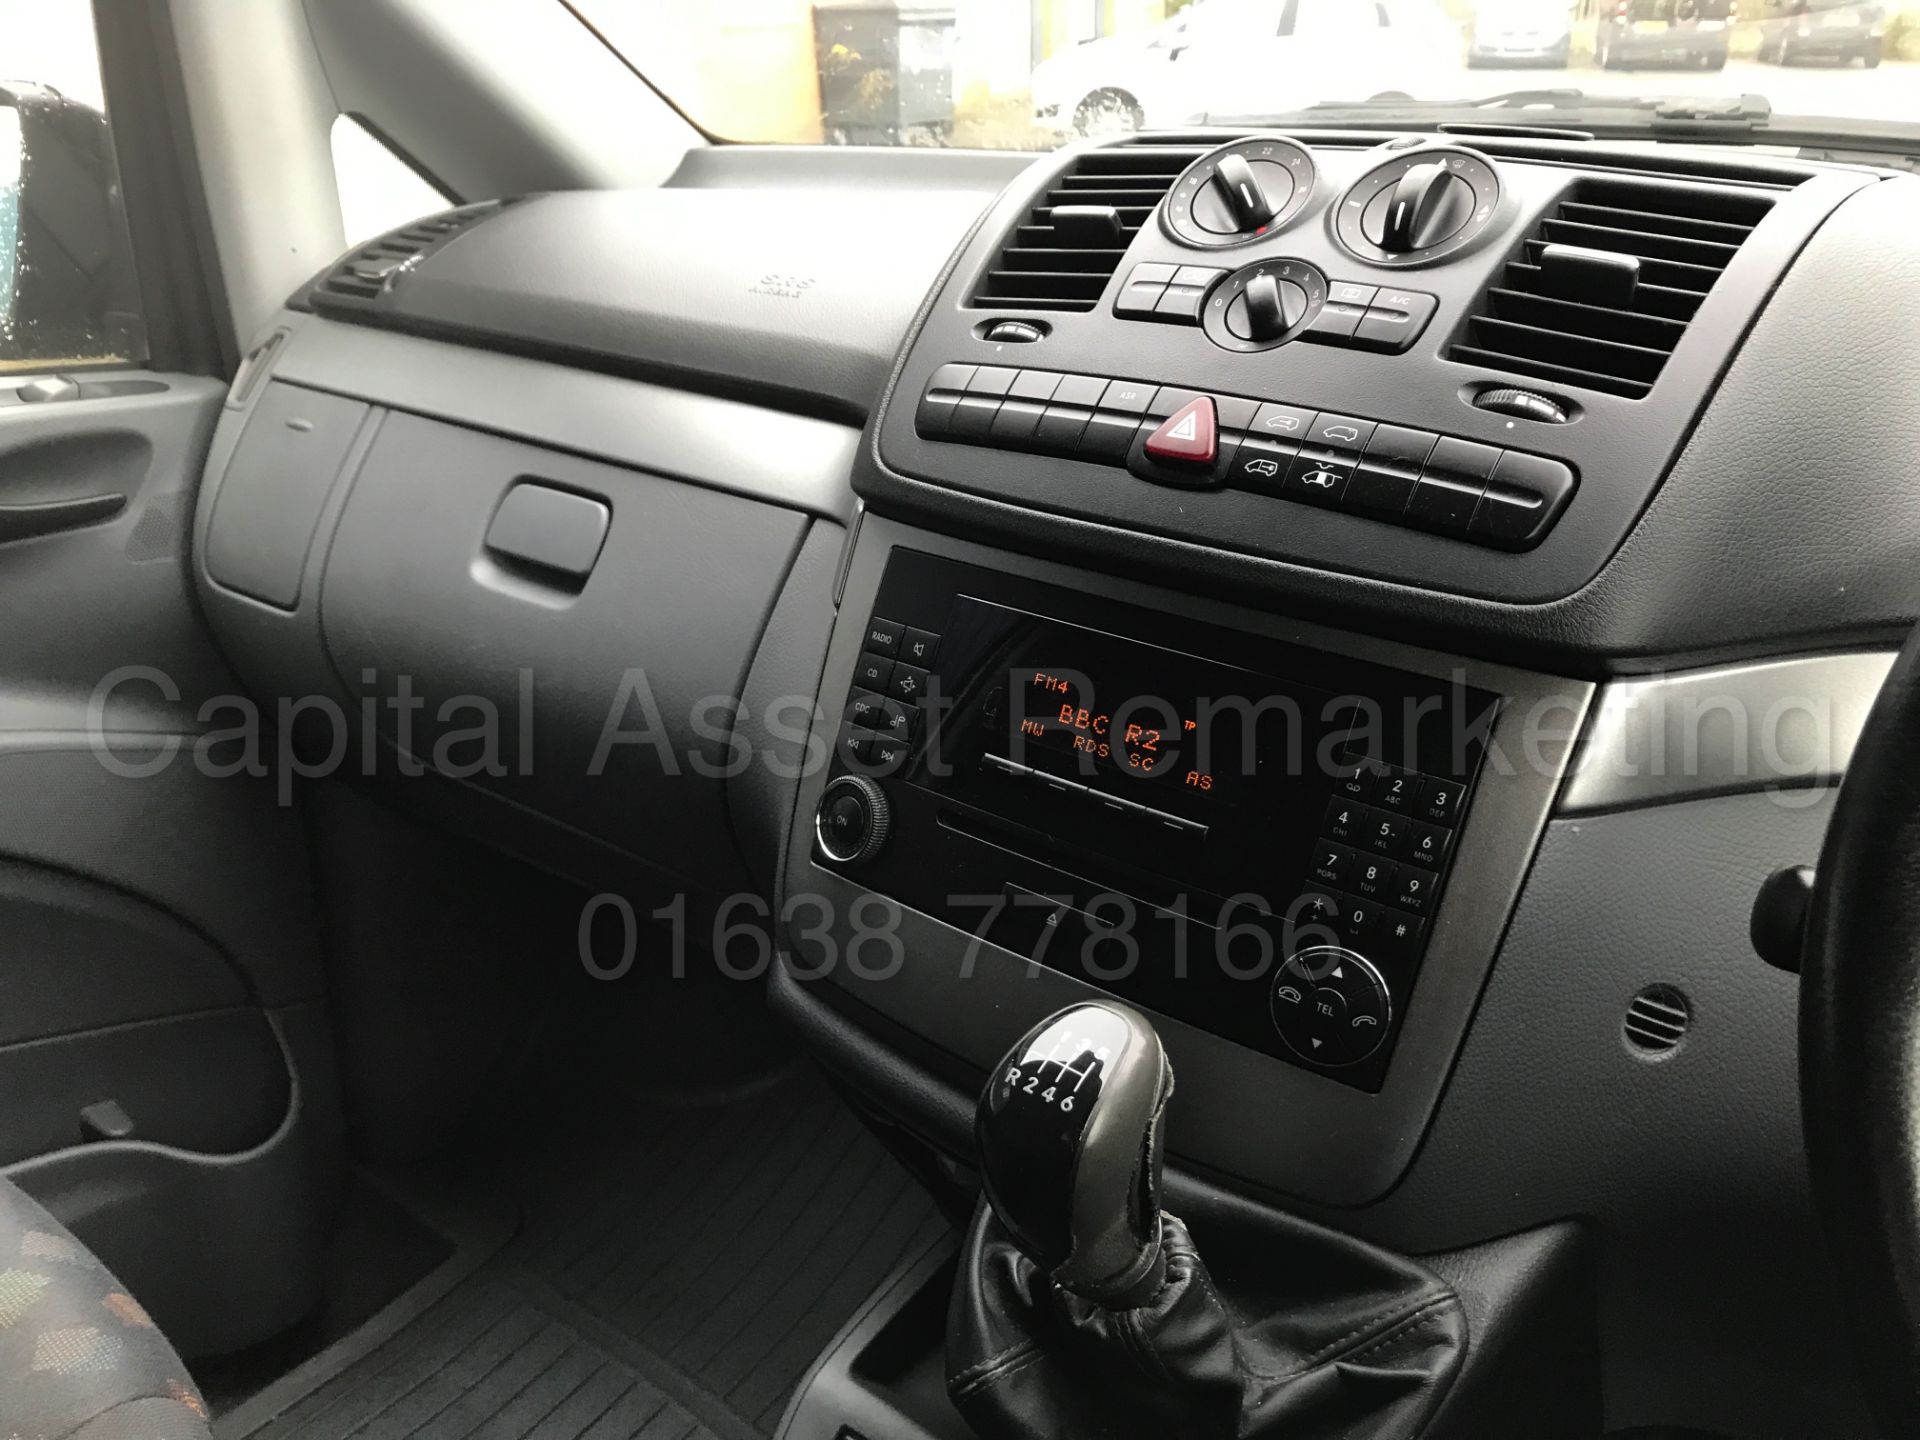 MERCEDES VITO *SPORT* '5 SEATER DUELINER' (2010 - 10 REG) '2.1 CDI - 150 BHP - 6 SPEED' **AIR CON** - Image 28 of 35